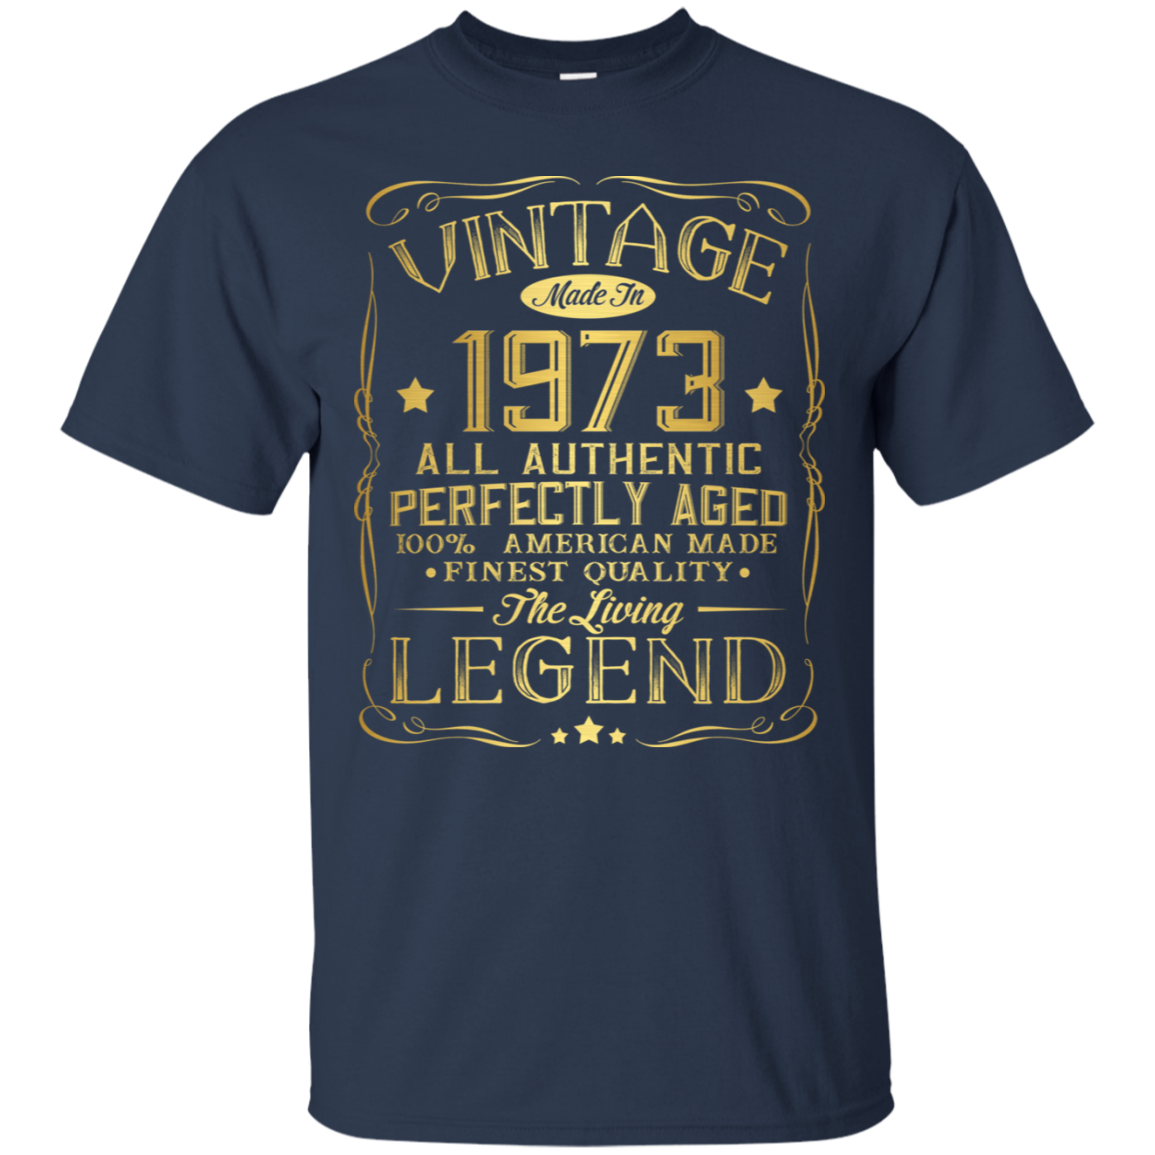 Vintage Made In 1973 All Authentic Perfectly Aged 100% American TShirt ...